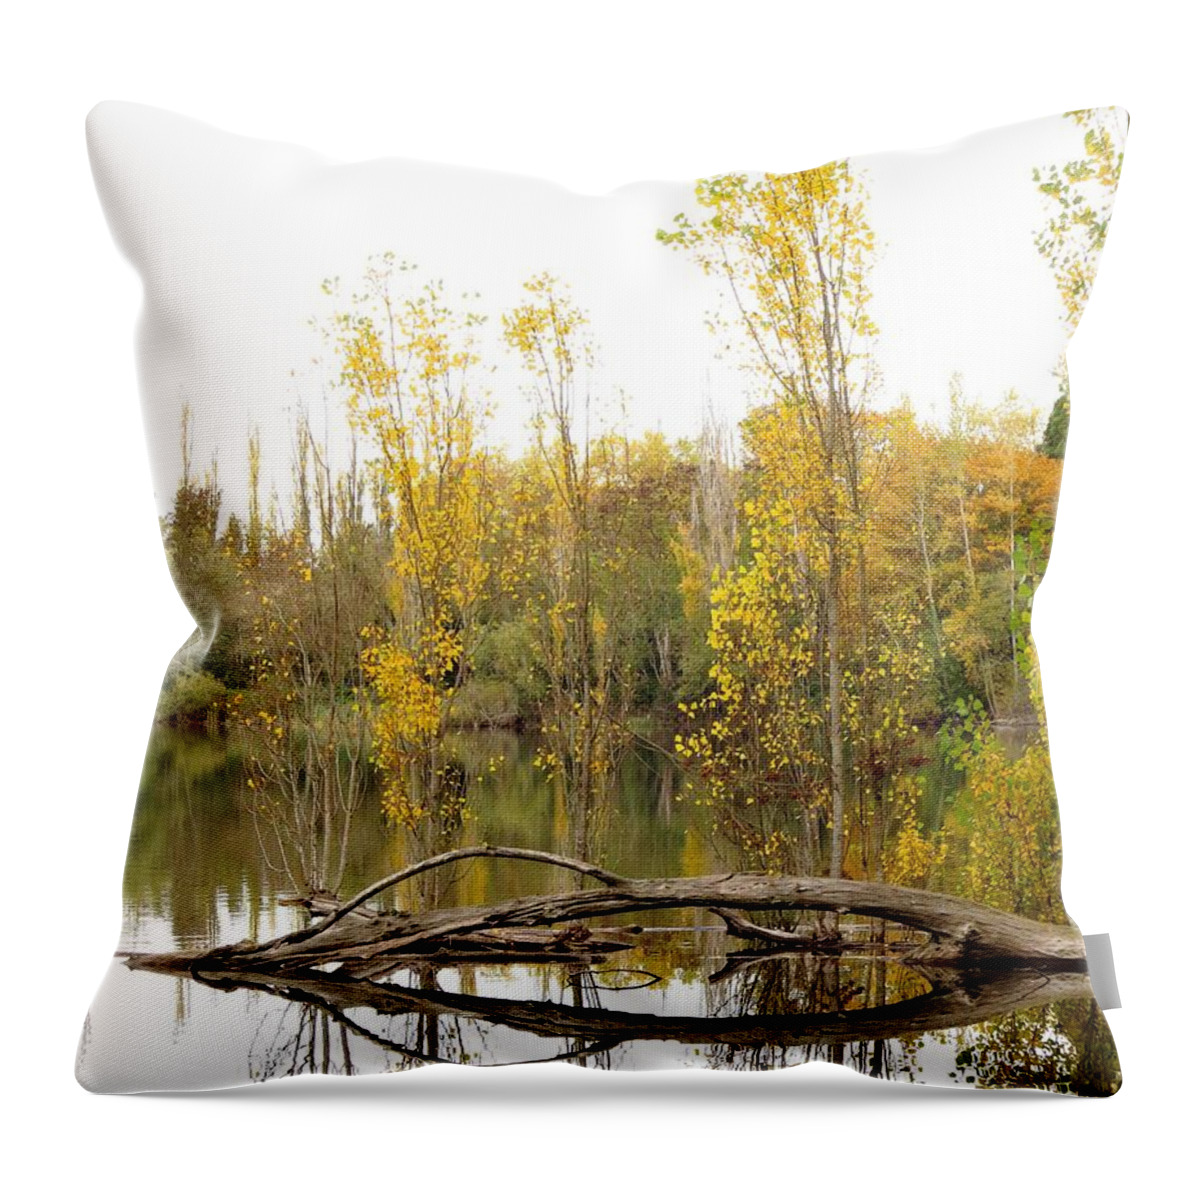 Autumn Pond Reflections Throw Pillow featuring the photograph Golden Days by I'ina Van Lawick